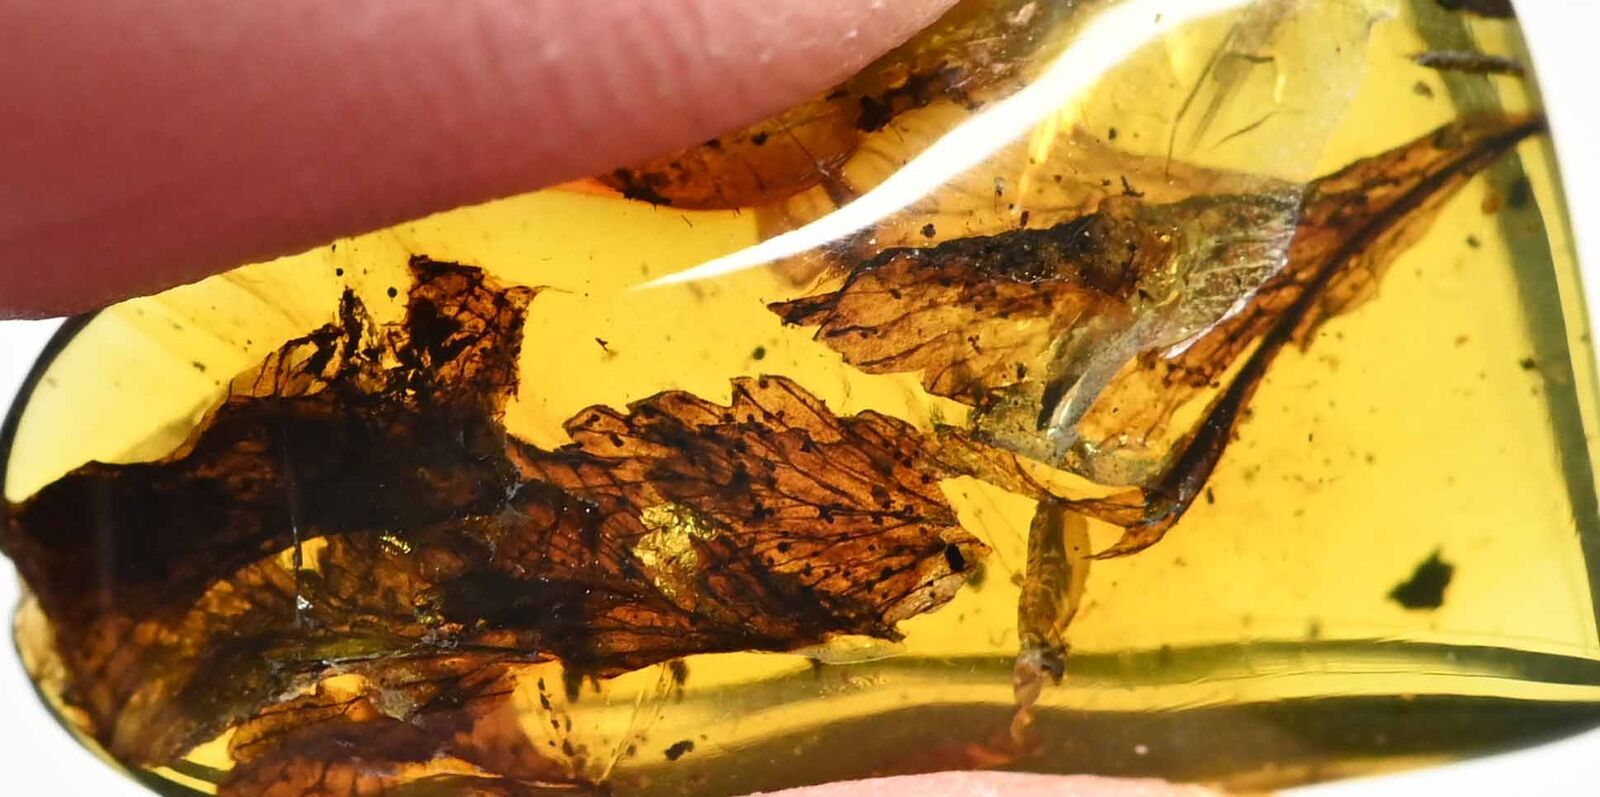 Nice Botanical Leaf, Fossil inclusion in Burmese Amber